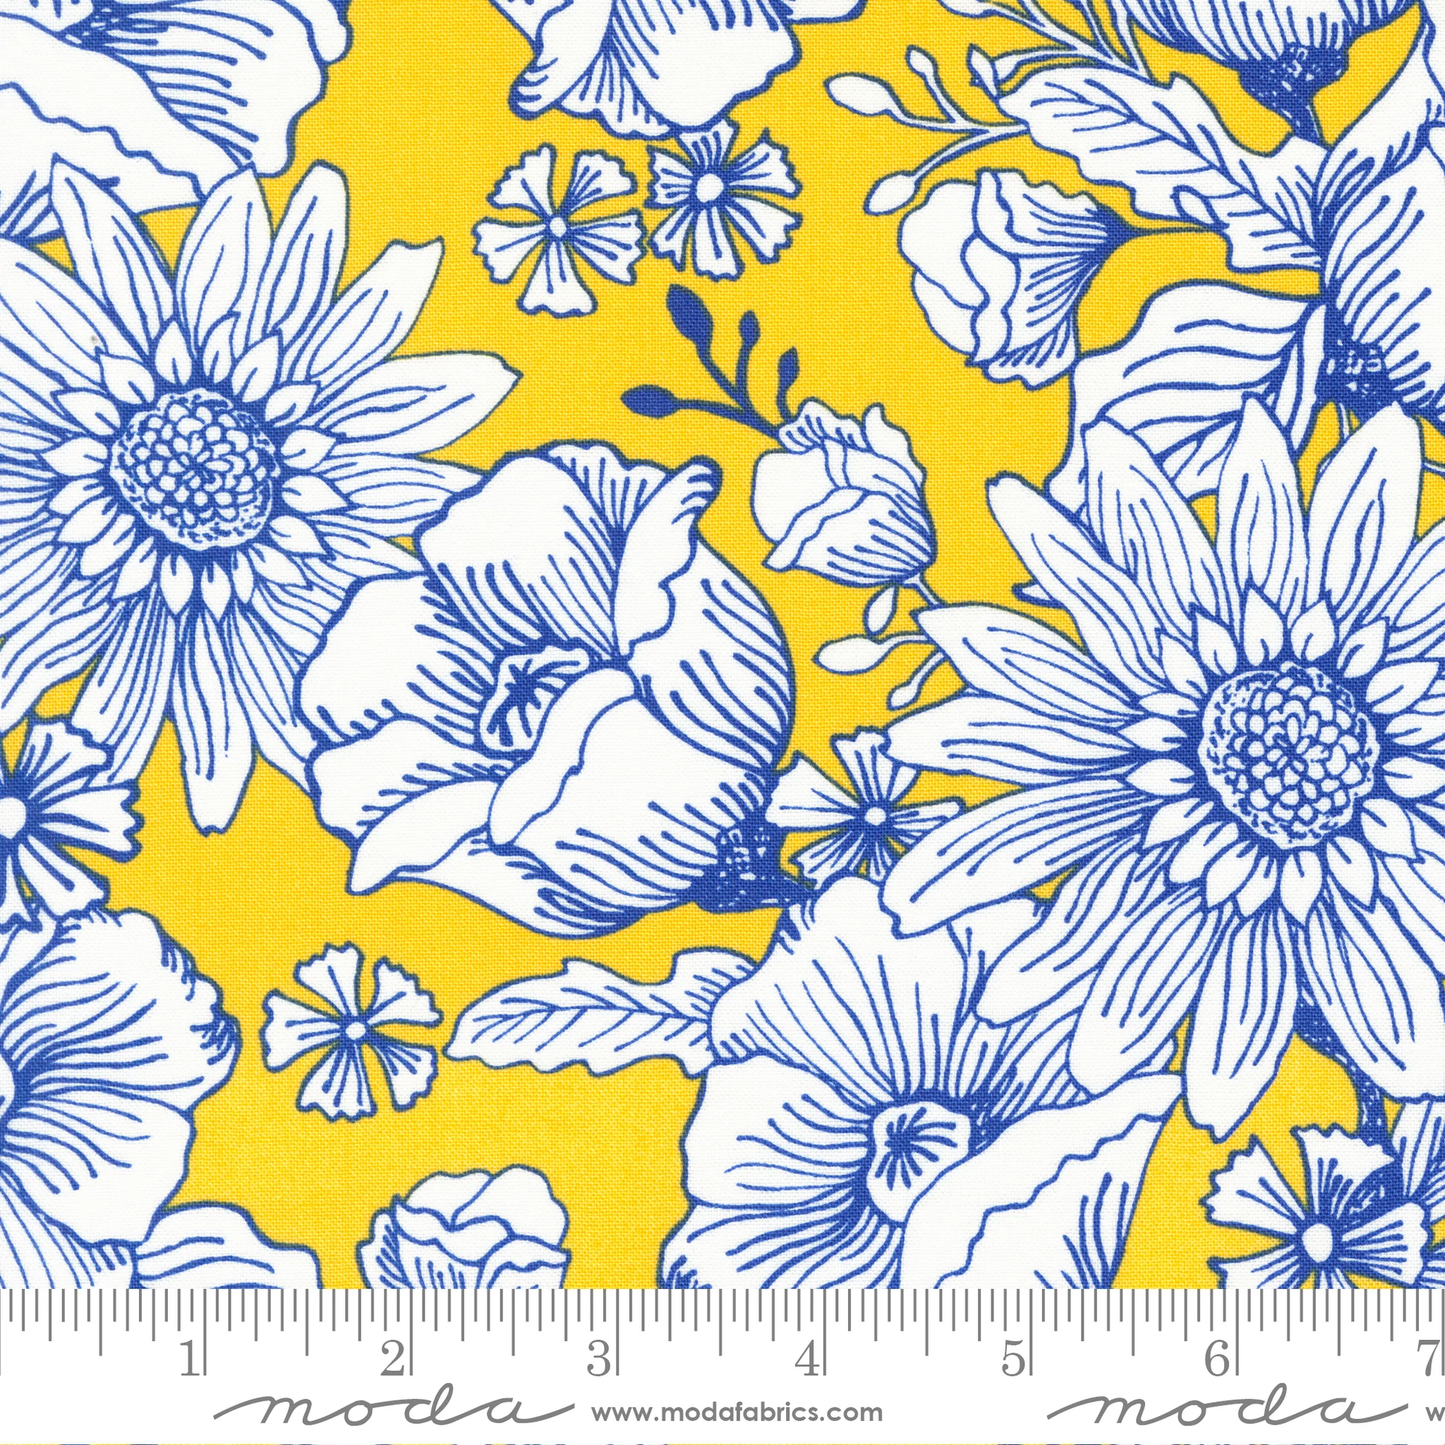 Sunflowers in my heart by Kate Spain for Moda  21 $24.96/m